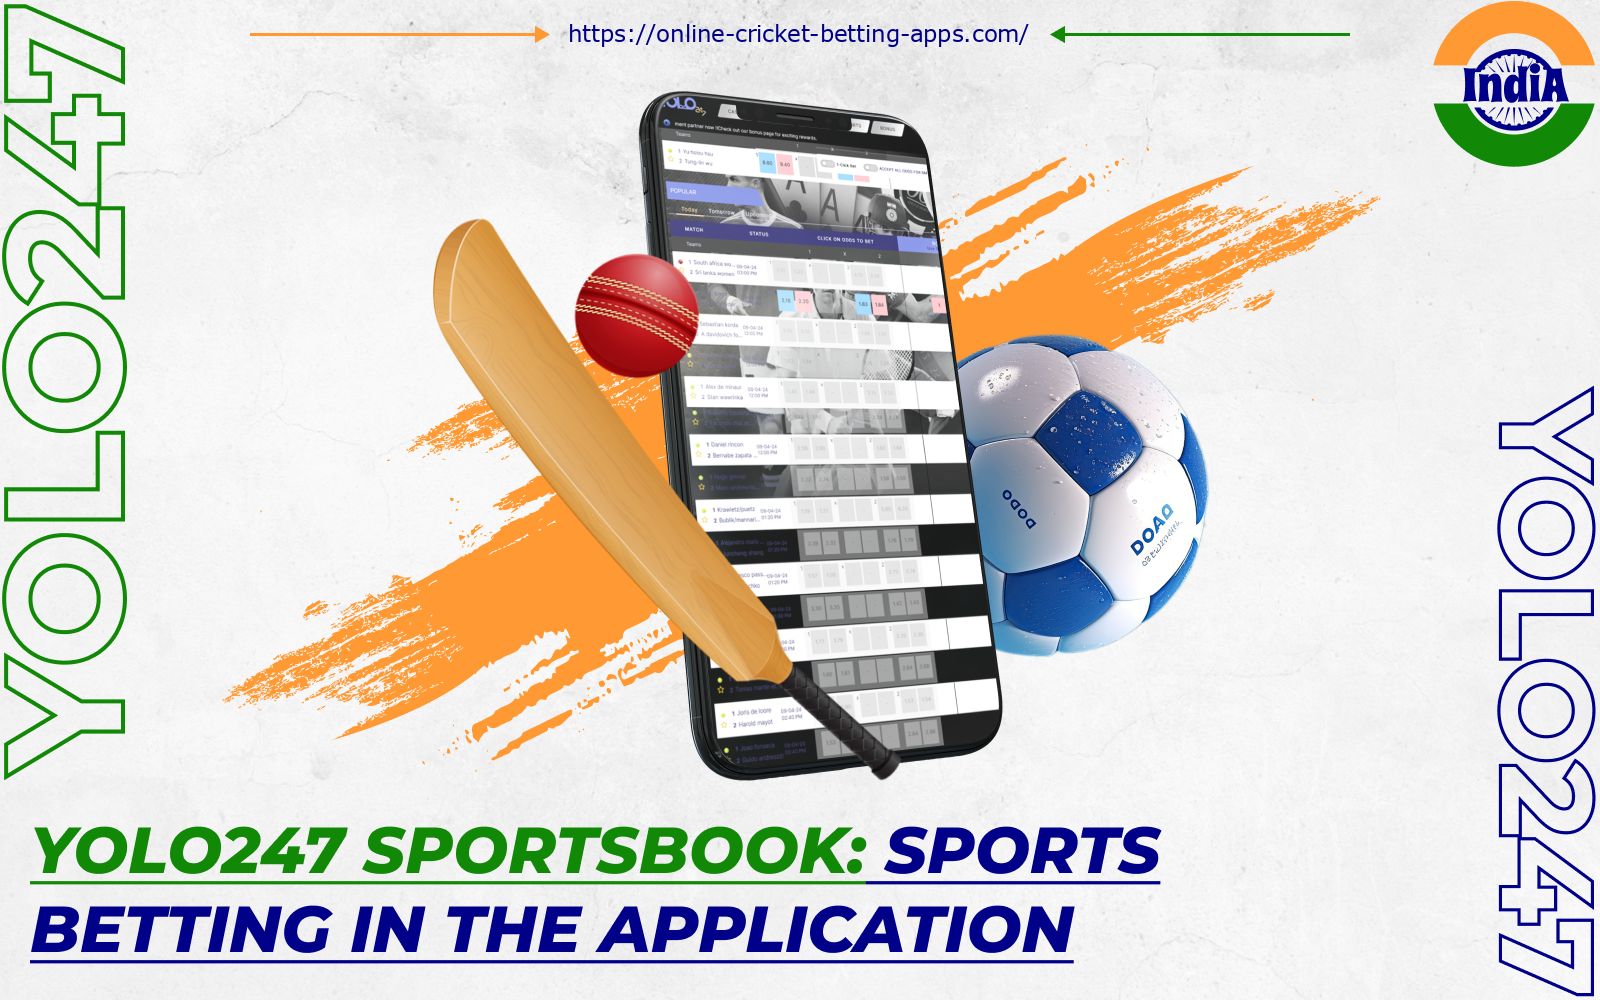 Indian punters can bet on all official matches in over 30 sports disciplines on the Yolo247 app